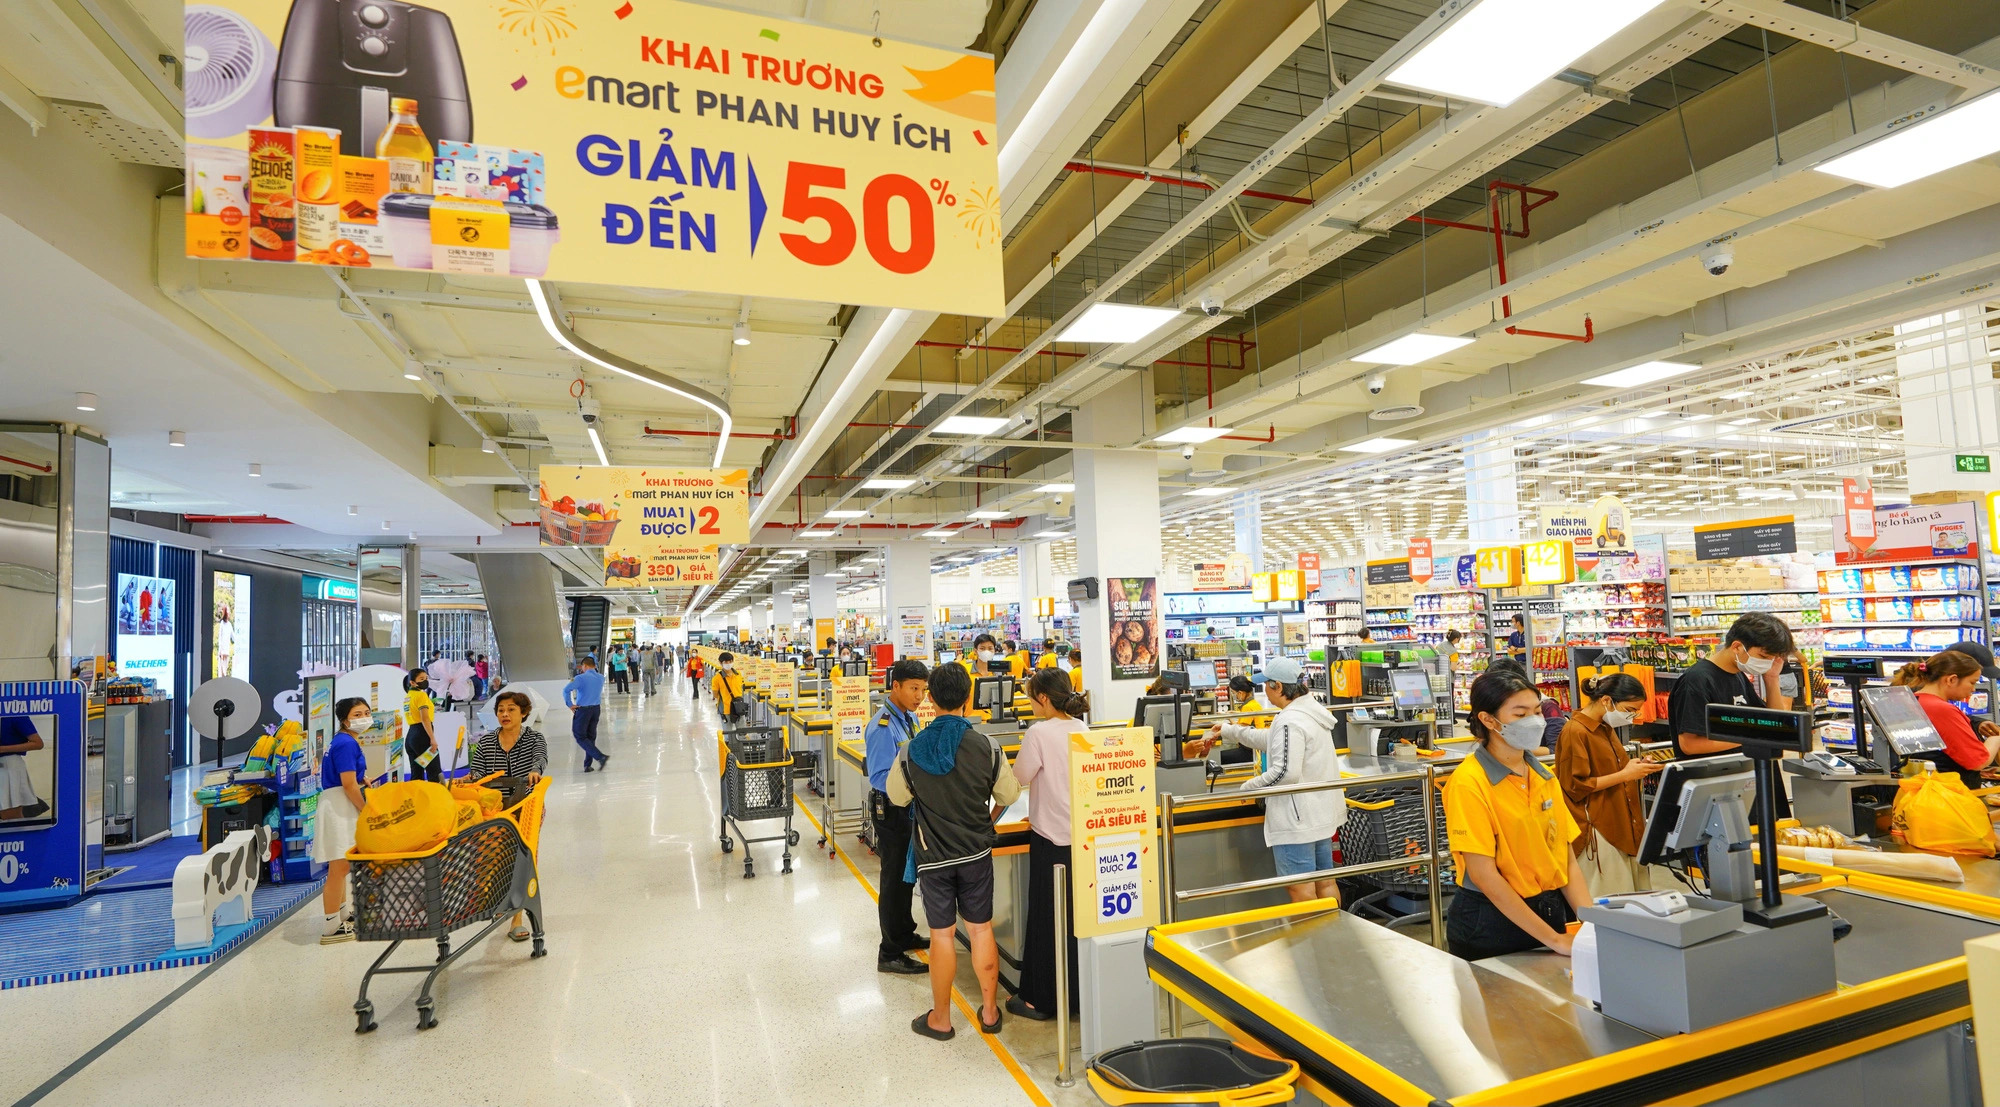 Vietnamese magnate expands retail empire with new Emart in Ho Chi Minh City